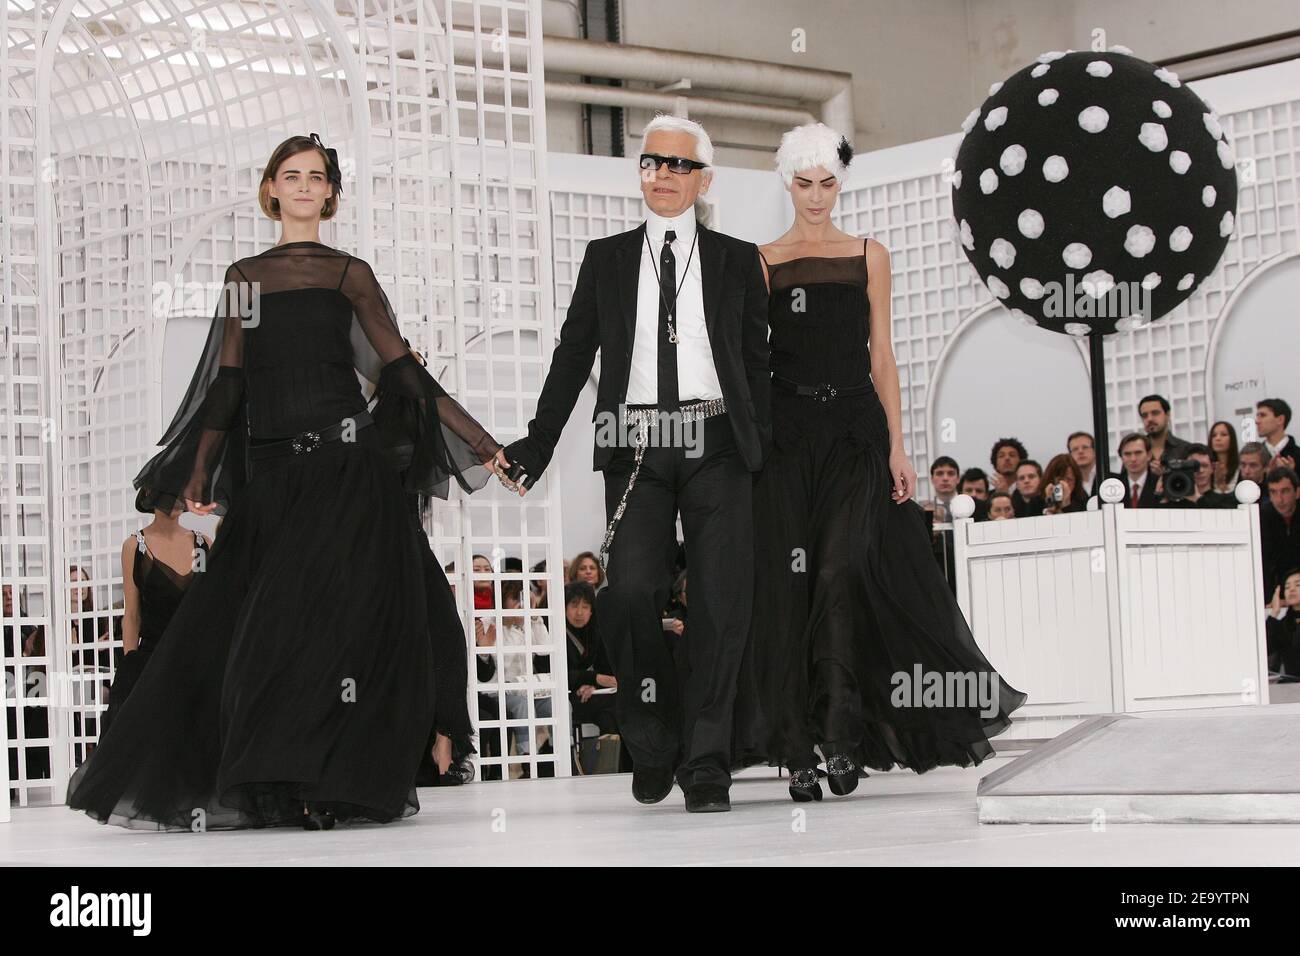 German fashion designer Karl Lagerfeld after the presentation of his 2005  Spring-Summer Haute-Couture collection for French fashion house Chanel at  Ateliers Berthier in Paris, France, on January 25, 2005. Photo by  Klein-Nebinger/ABACA